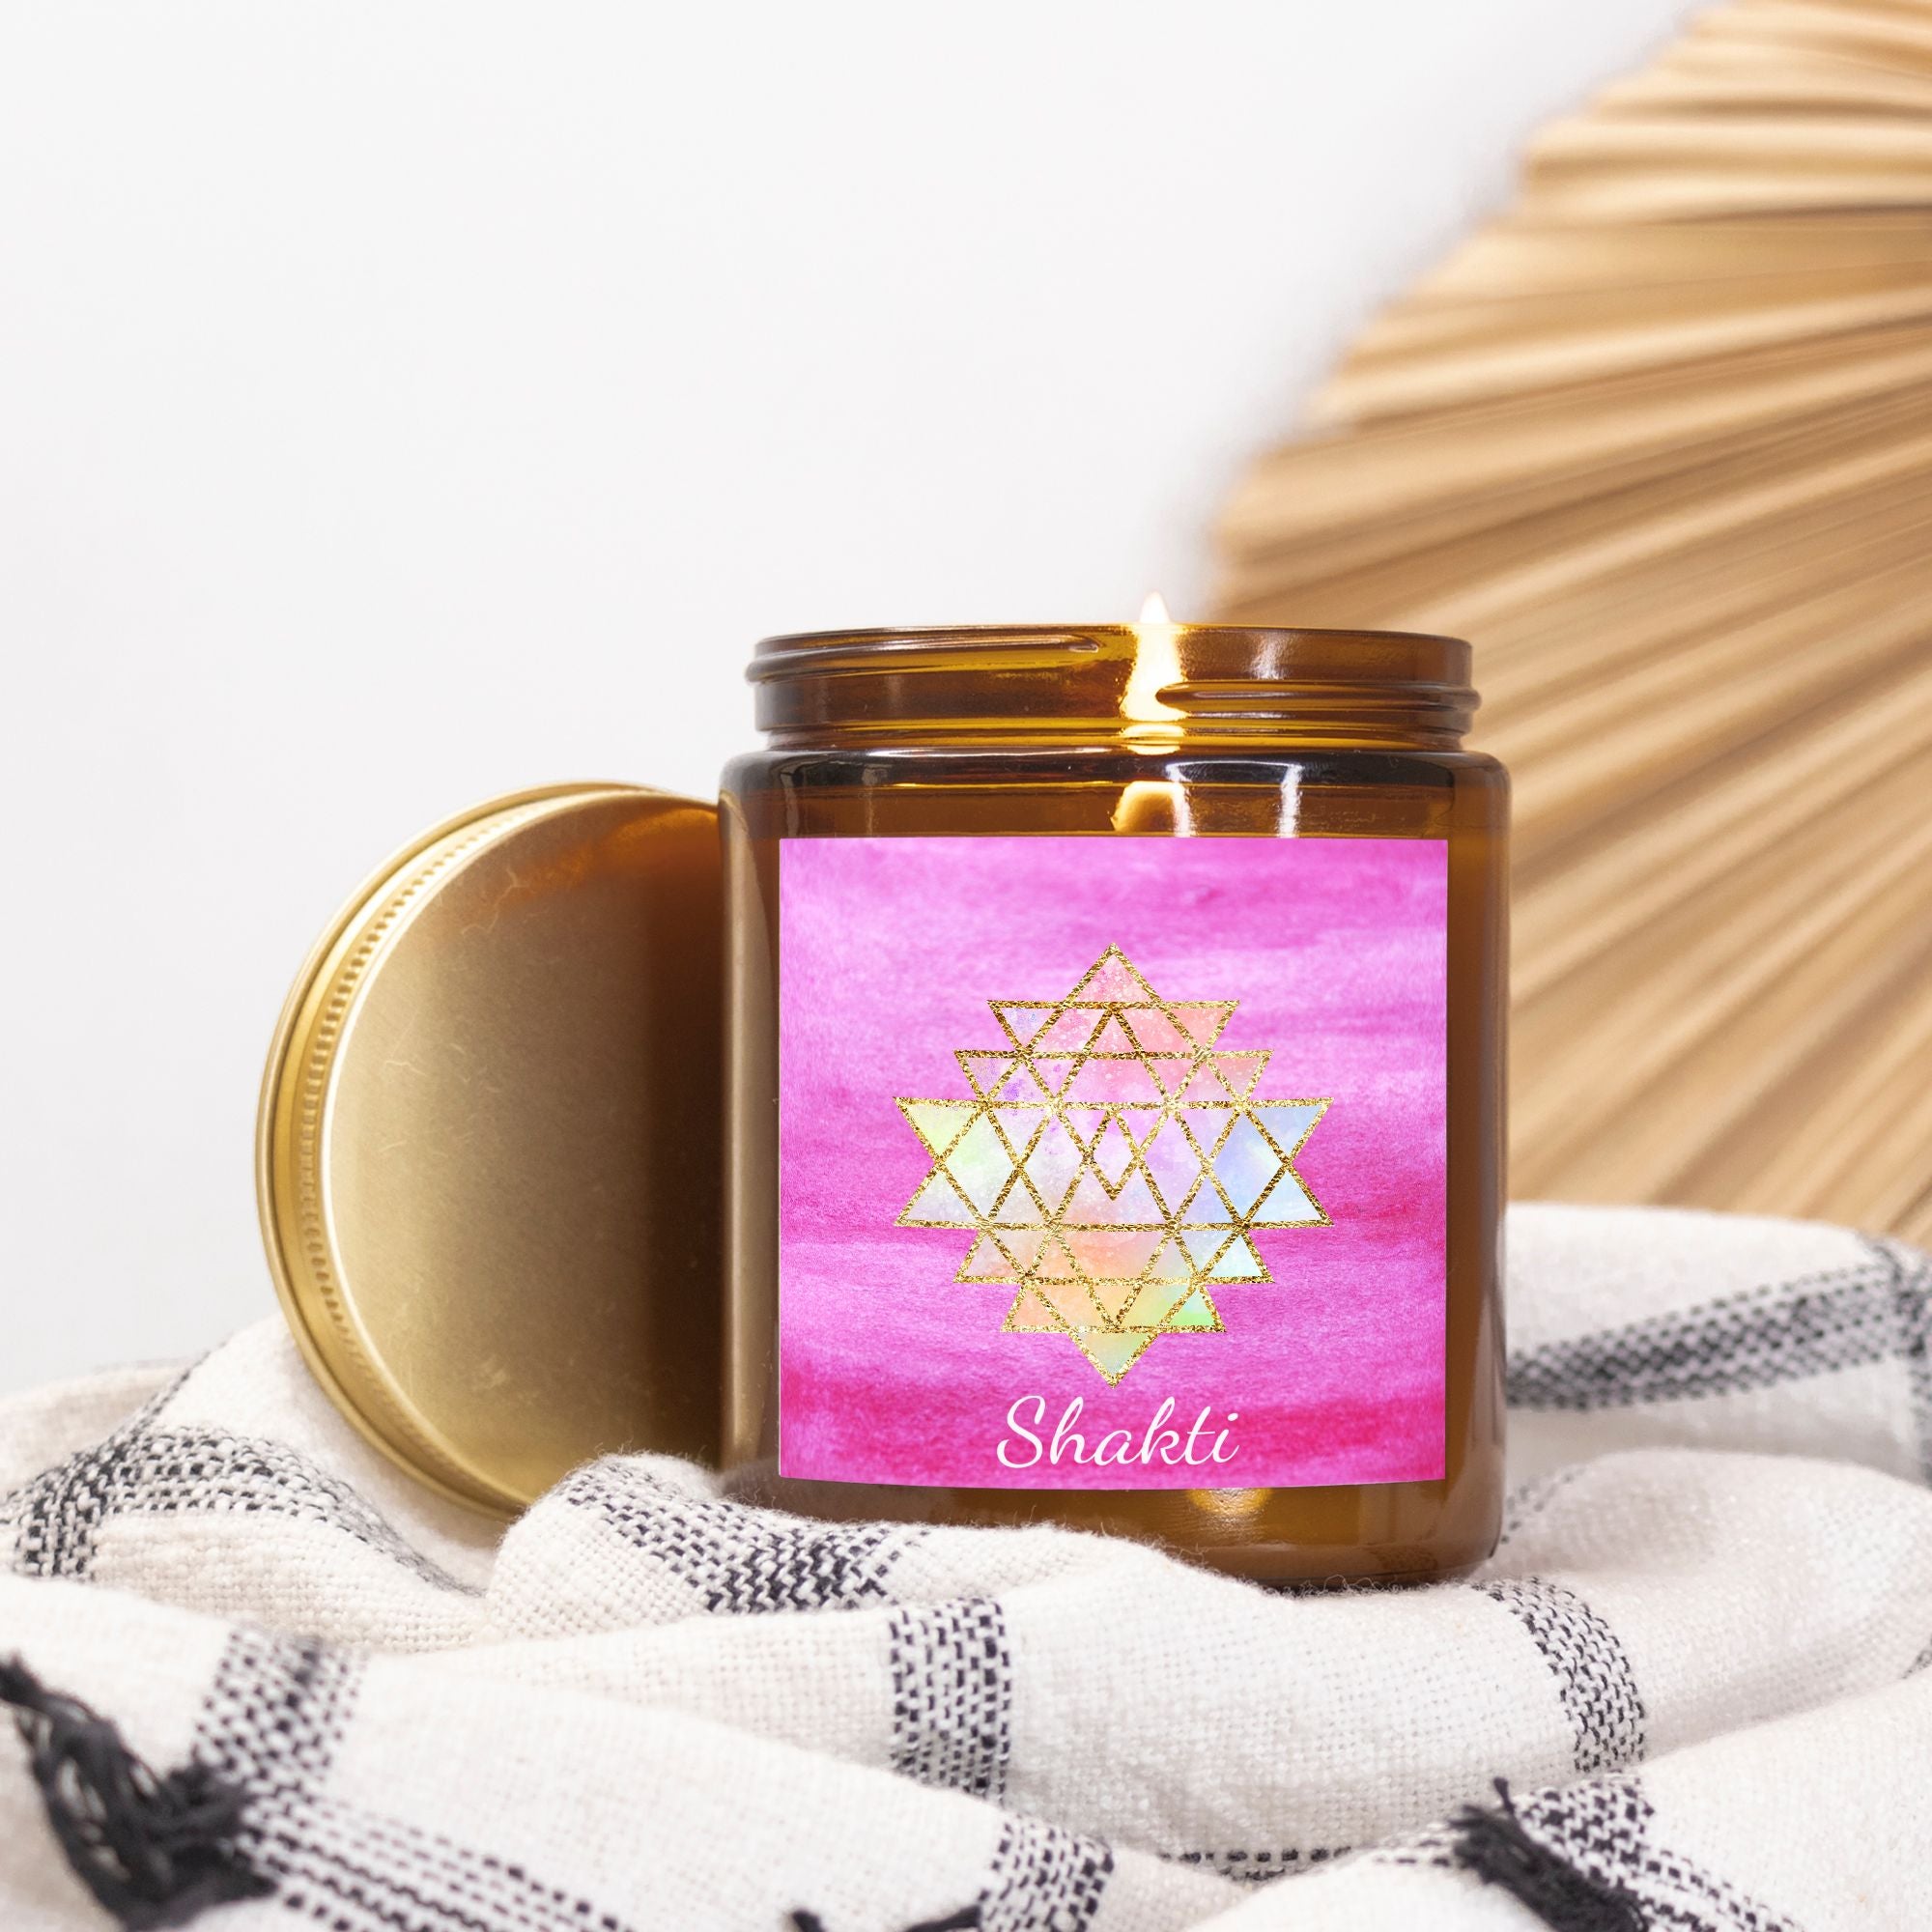 Shakti Coconut Soy Vegan Candle in an Amber Jar 9oz by Goddess Swag. Hand Poured. Toxin-free. Paraben-free. Phthalate-free.